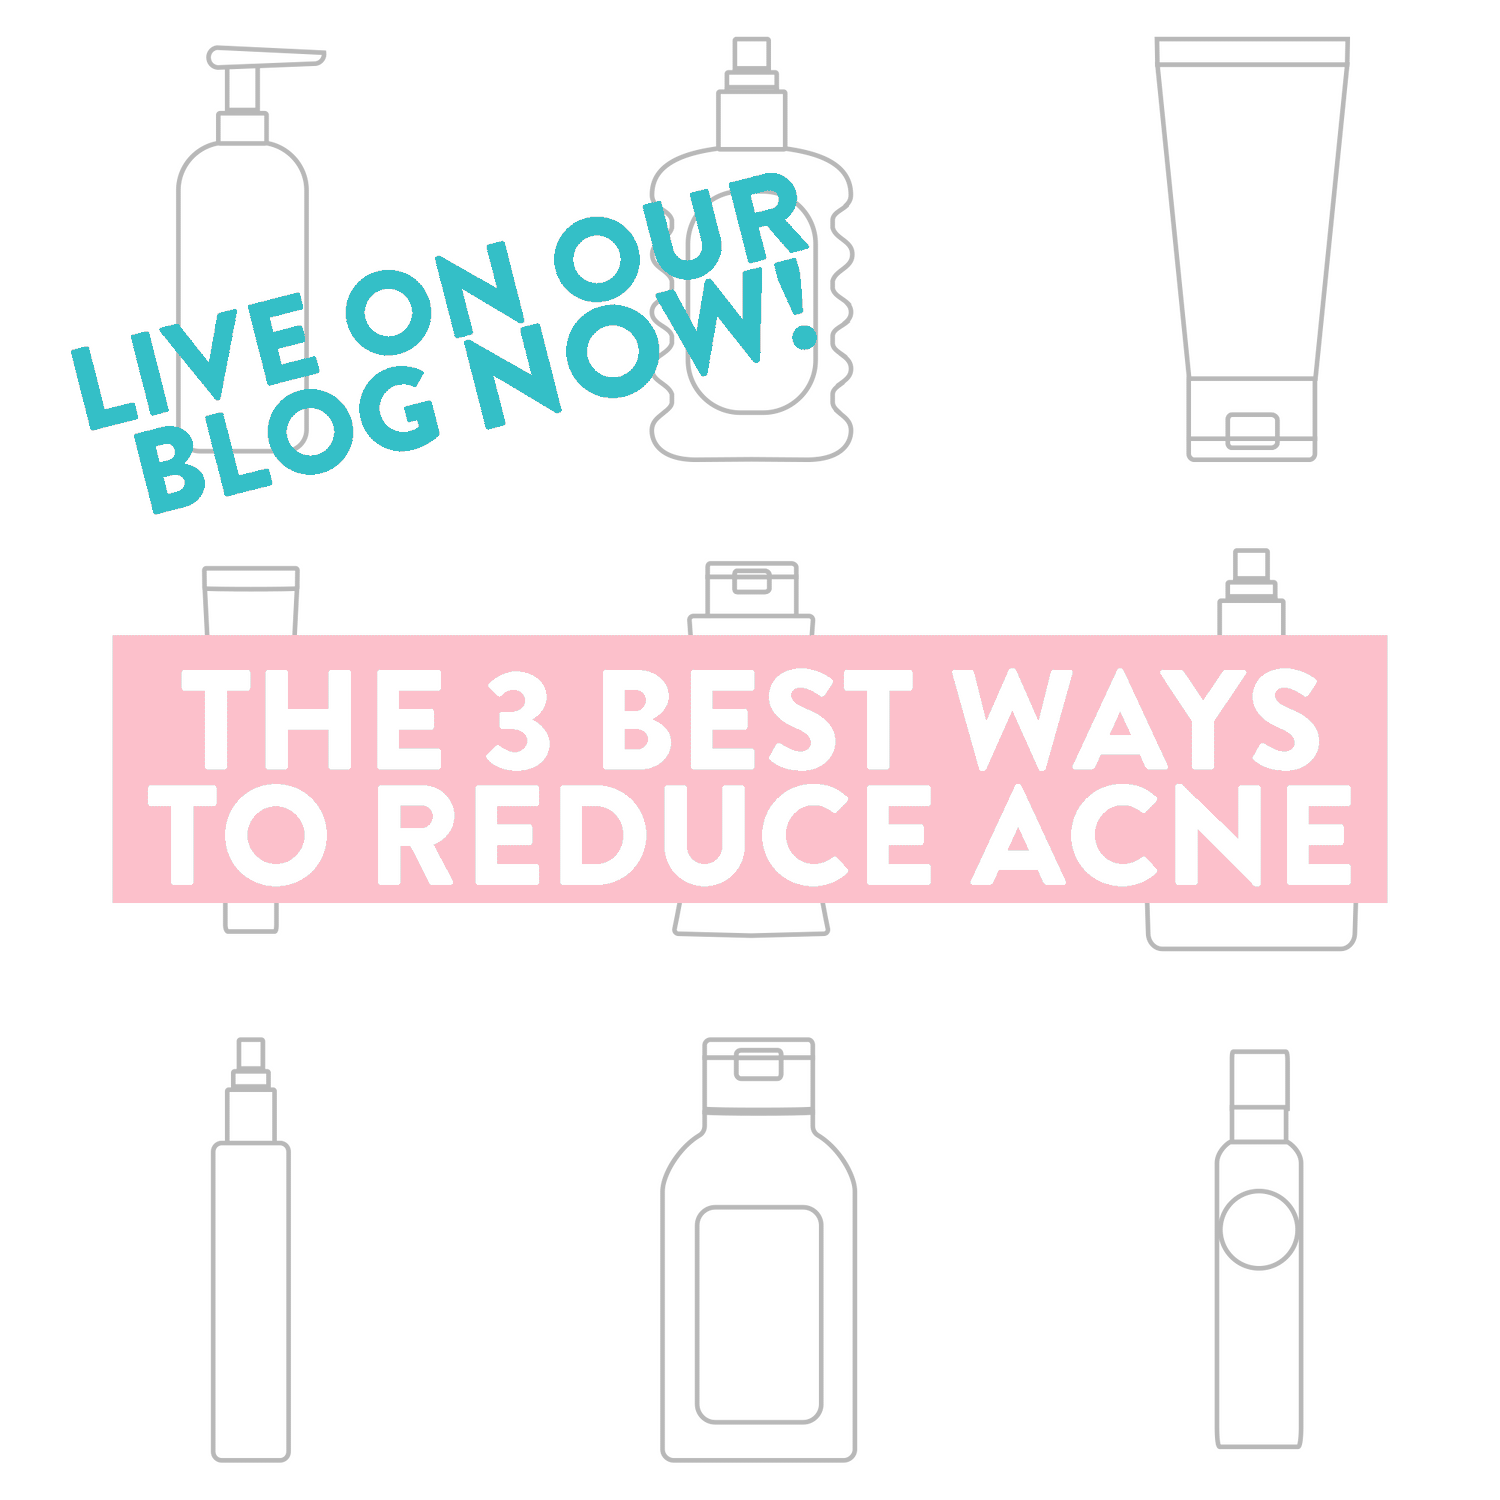 The 3 best ways to reduce acne 🧖🏼‍♀️✨